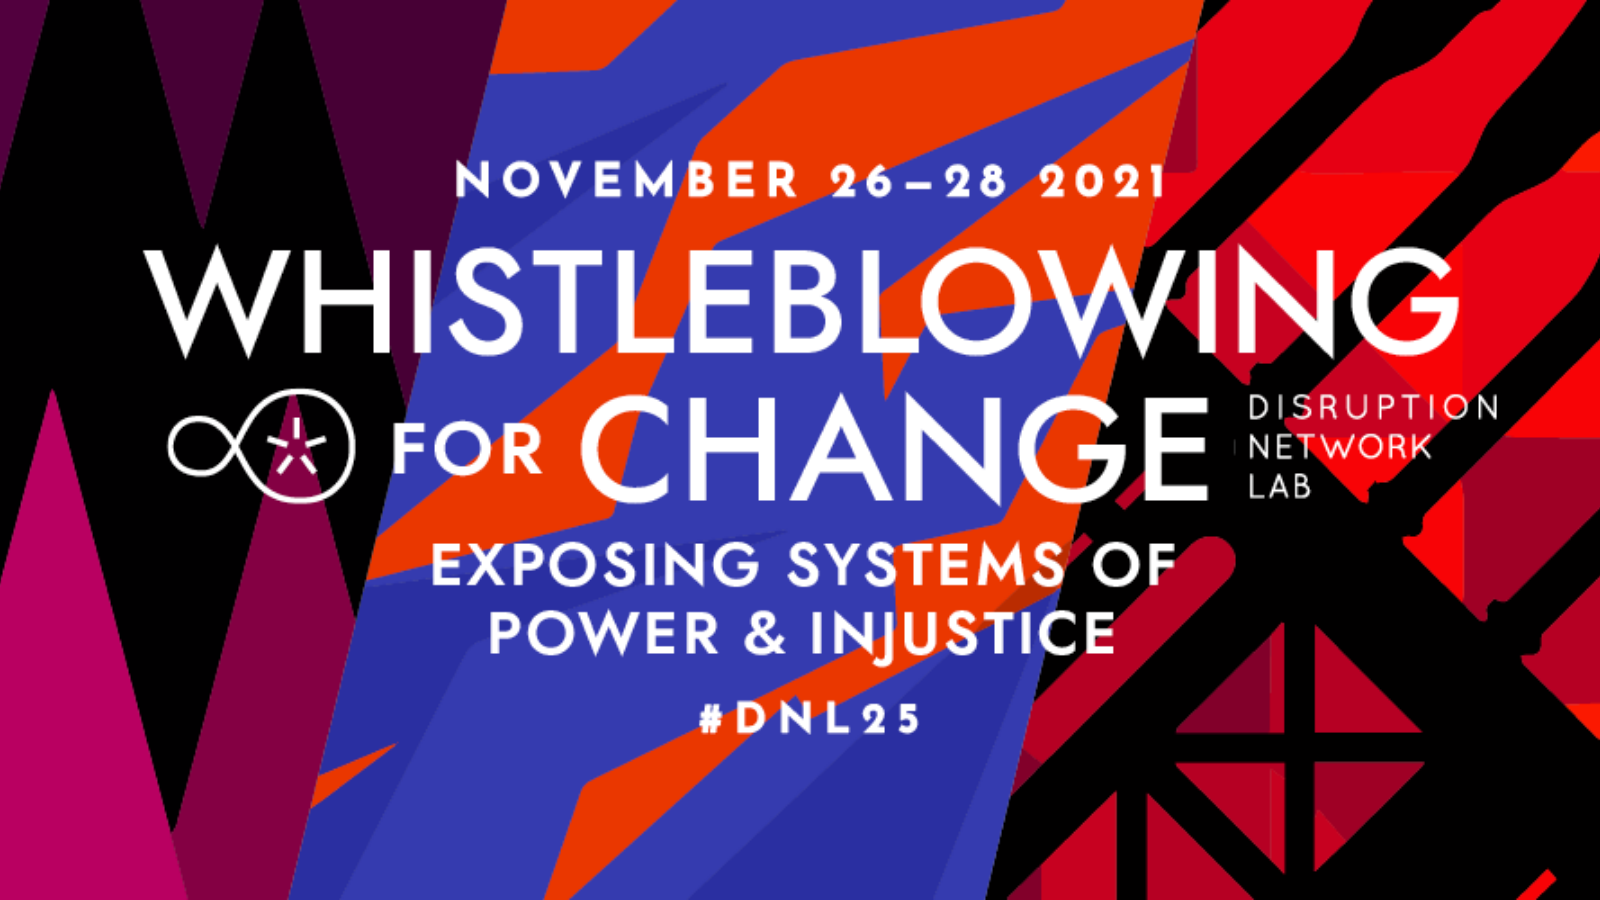 Conference & Book Launch: Whistleblowing for Change Exposing Systems of Power & Injustice